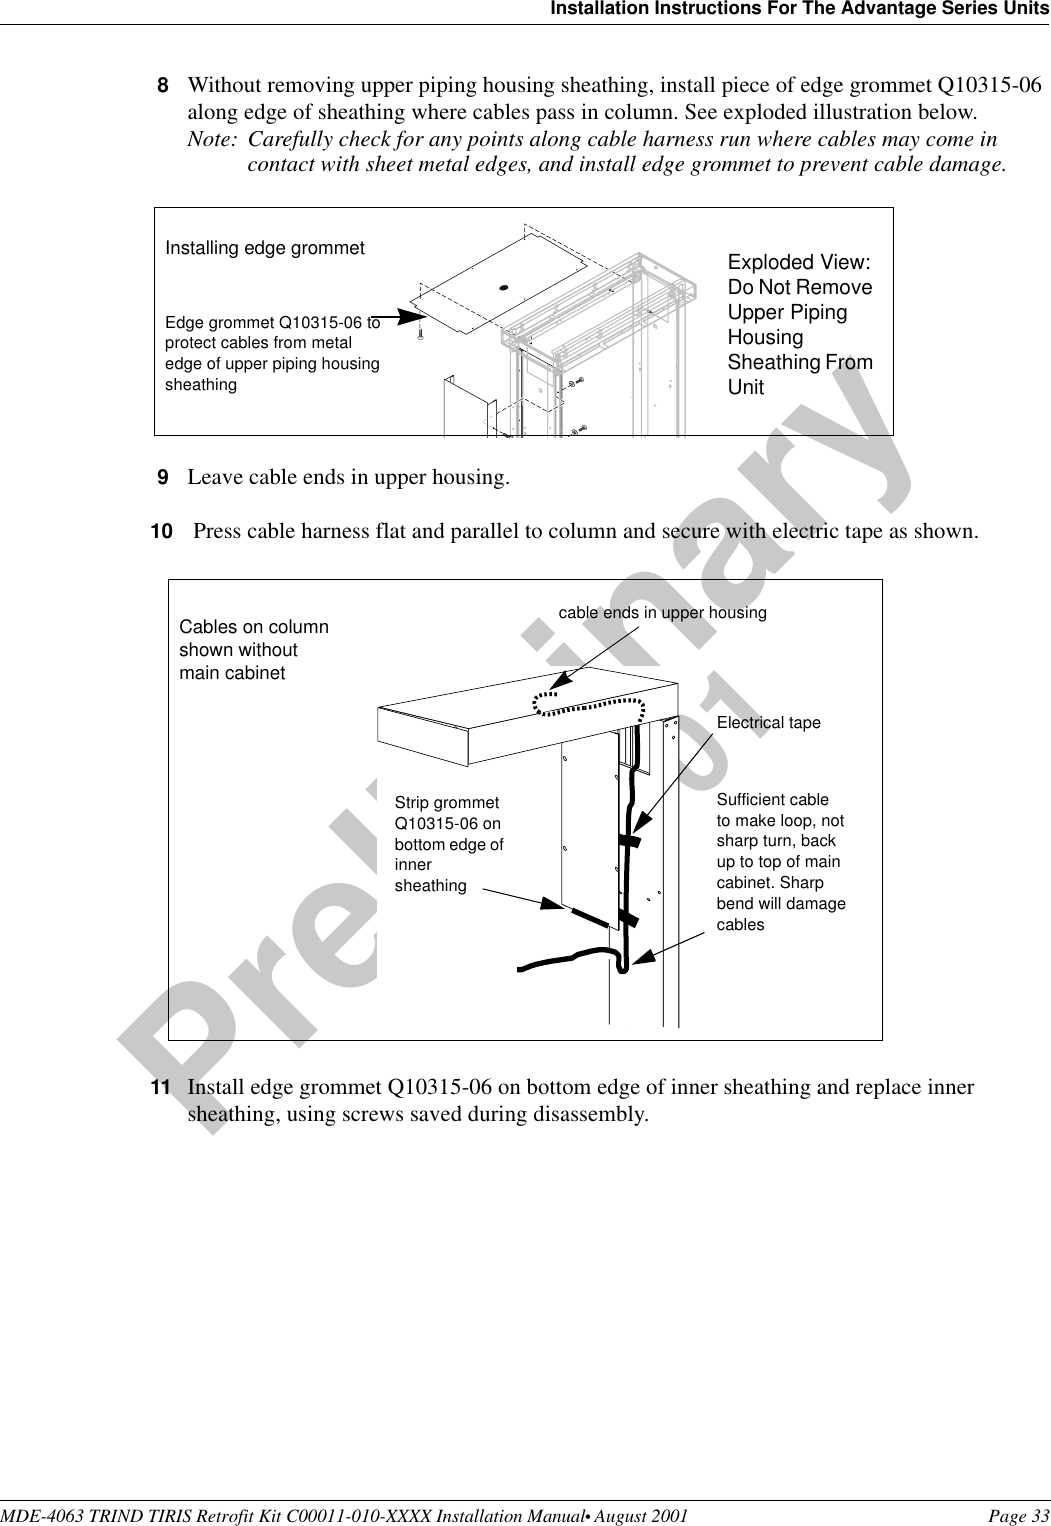 MDE-4063 TRIND TIRIS Retrofit Kit C00011-010-XXXX Installation Manual• August 2001 Page 33Installation Instructions For The Advantage Series UnitsPreliminary08-24-018Without removing upper piping housing sheathing, install piece of edge grommet Q10315-06 along edge of sheathing where cables pass in column. See exploded illustration below.Note: Carefully check for any points along cable harness run where cables may come in contact with sheet metal edges, and install edge grommet to prevent cable damage. 9Leave cable ends in upper housing.10  Press cable harness flat and parallel to column and secure with electric tape as shown.11 Install edge grommet Q10315-06 on bottom edge of inner sheathing and replace inner sheathing, using screws saved during disassembly.Edge grommet Q10315-06 to protect cables from metal edge of upper piping housing sheathingInstalling edge grommet Exploded View: Do Not Remove Upper Piping Housing Sheathing From UnitElectrical tapeSufficient cable to make loop, not sharp turn, back up to top of main cabinet. Sharp bend will damage cablesStrip grommet Q10315-06 on bottom edge of inner sheathingCables on column shown without main cabinetcable ends in upper housing